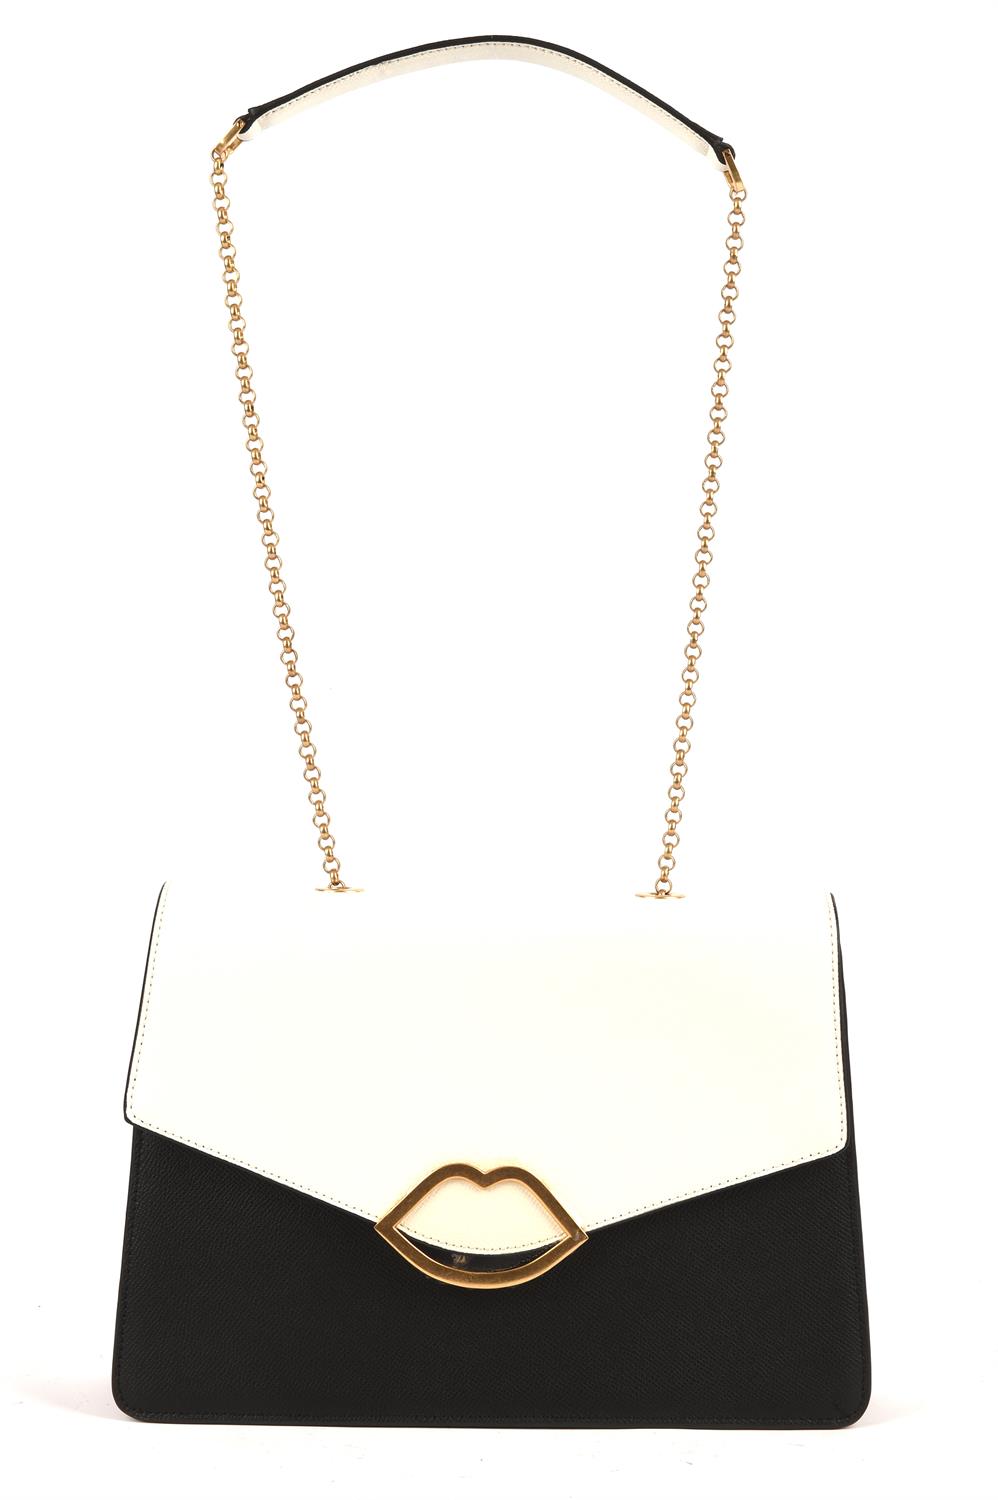 LULU GUINNESS red white and black grained leather handbag with gold chain, (Zara) dust bag and - Image 2 of 10